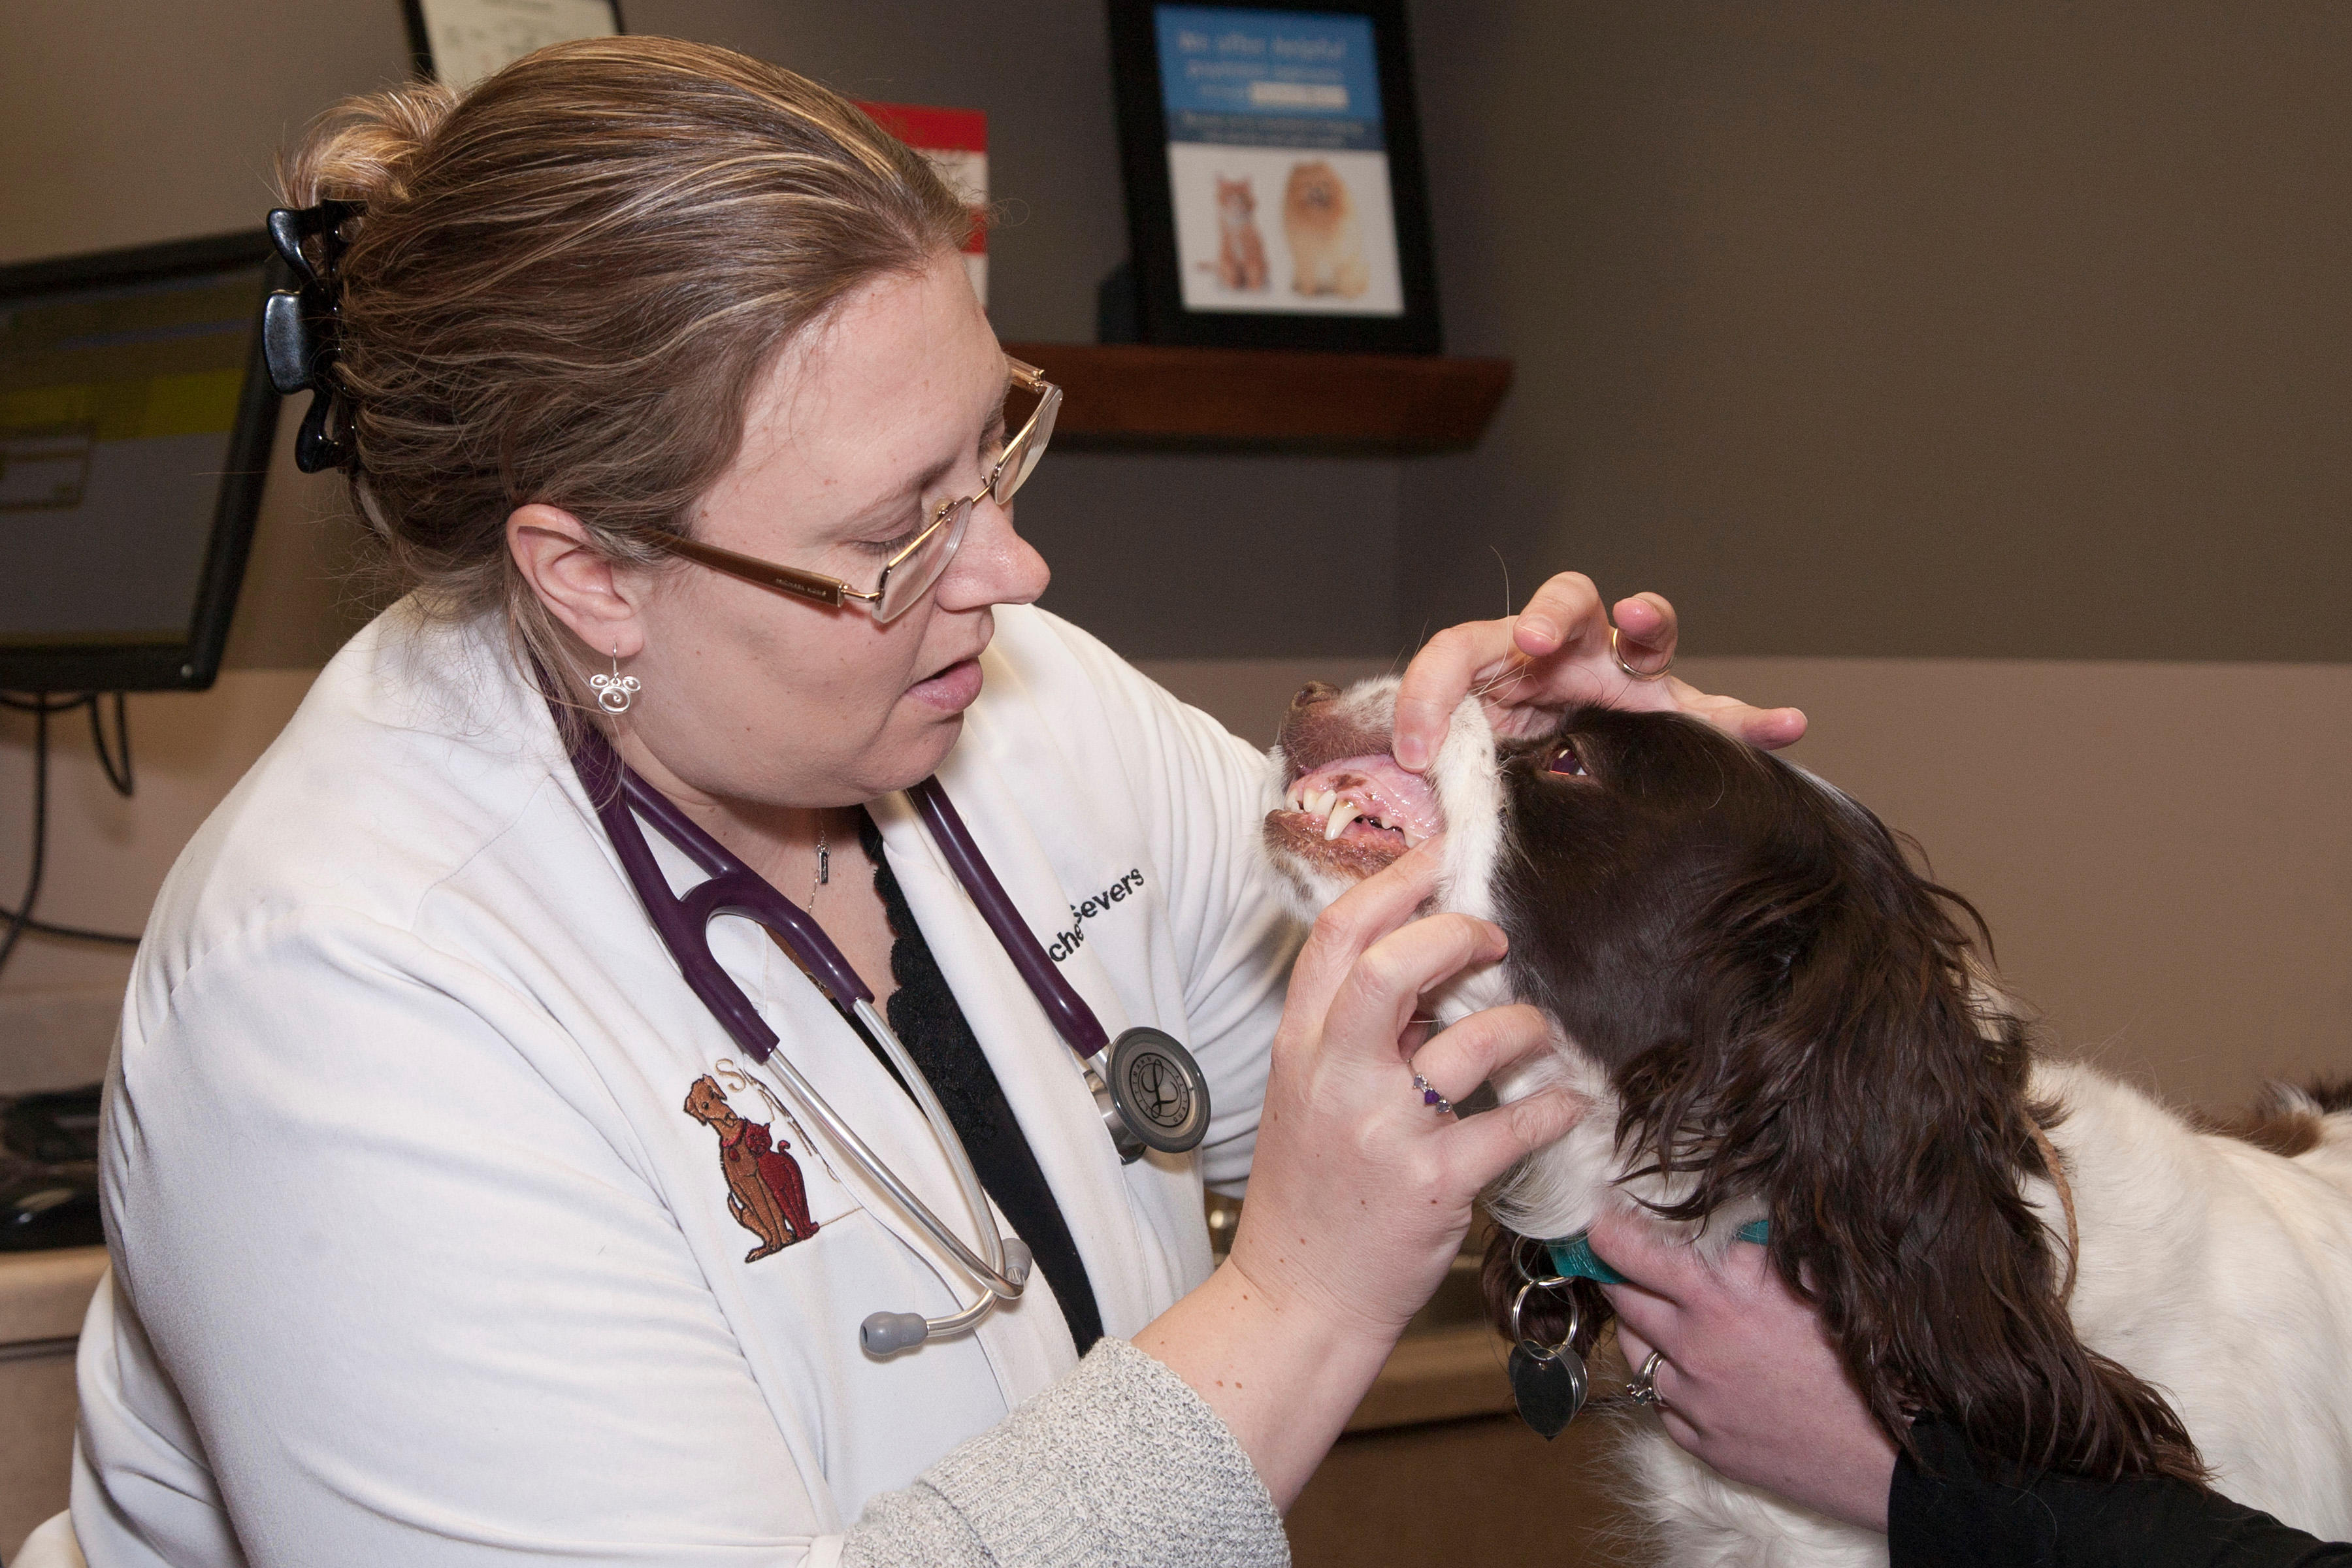 Proper dental care is not limited to human medicine. Pets need dental care too!